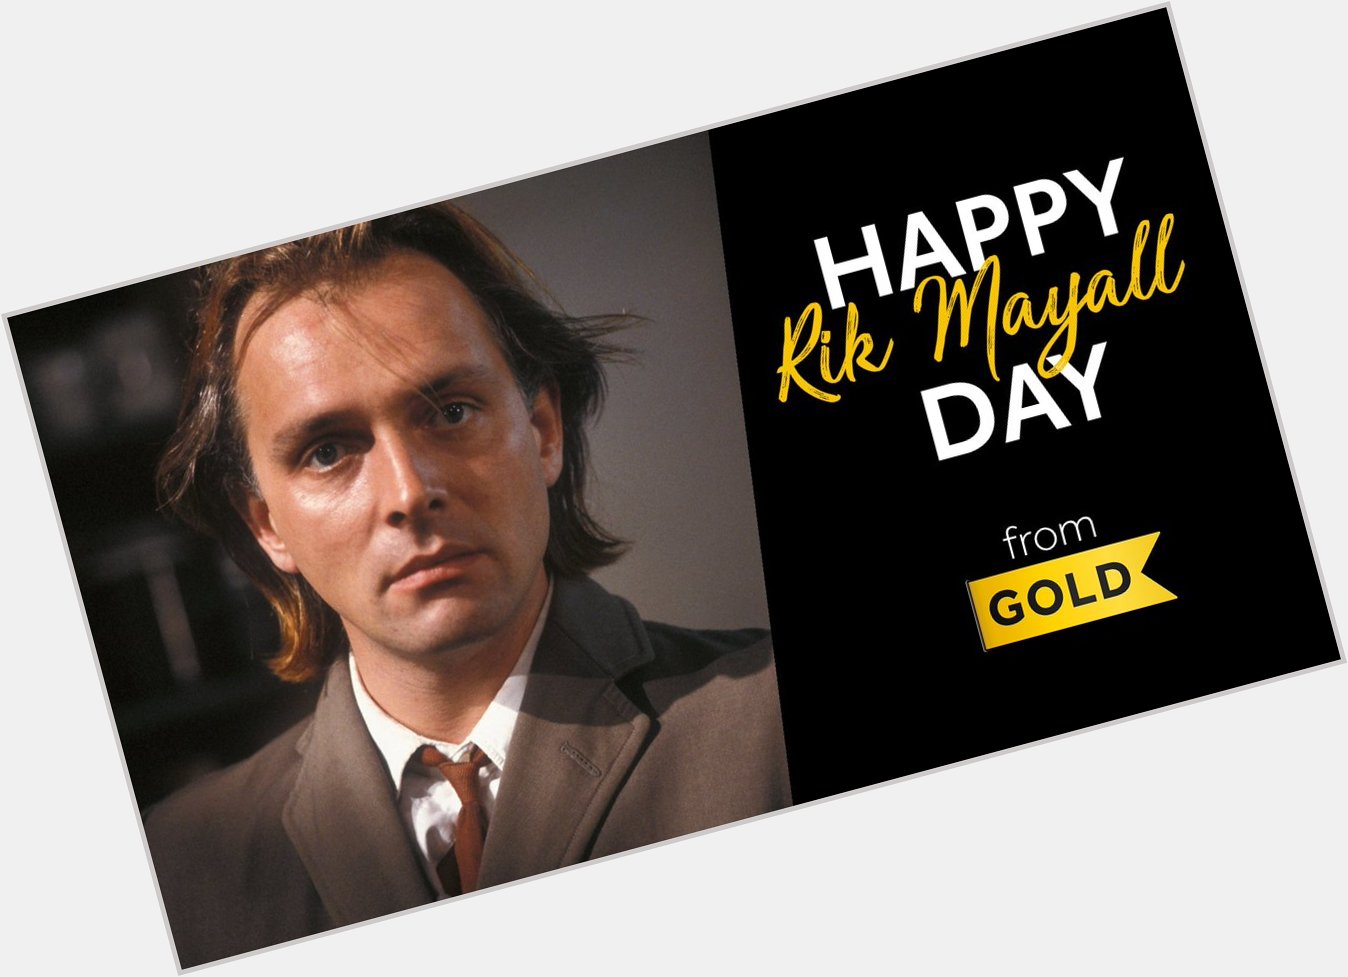 On what would have been Rik Mayall\s 60th birthday, we wanted to wish everyone a very Happy 